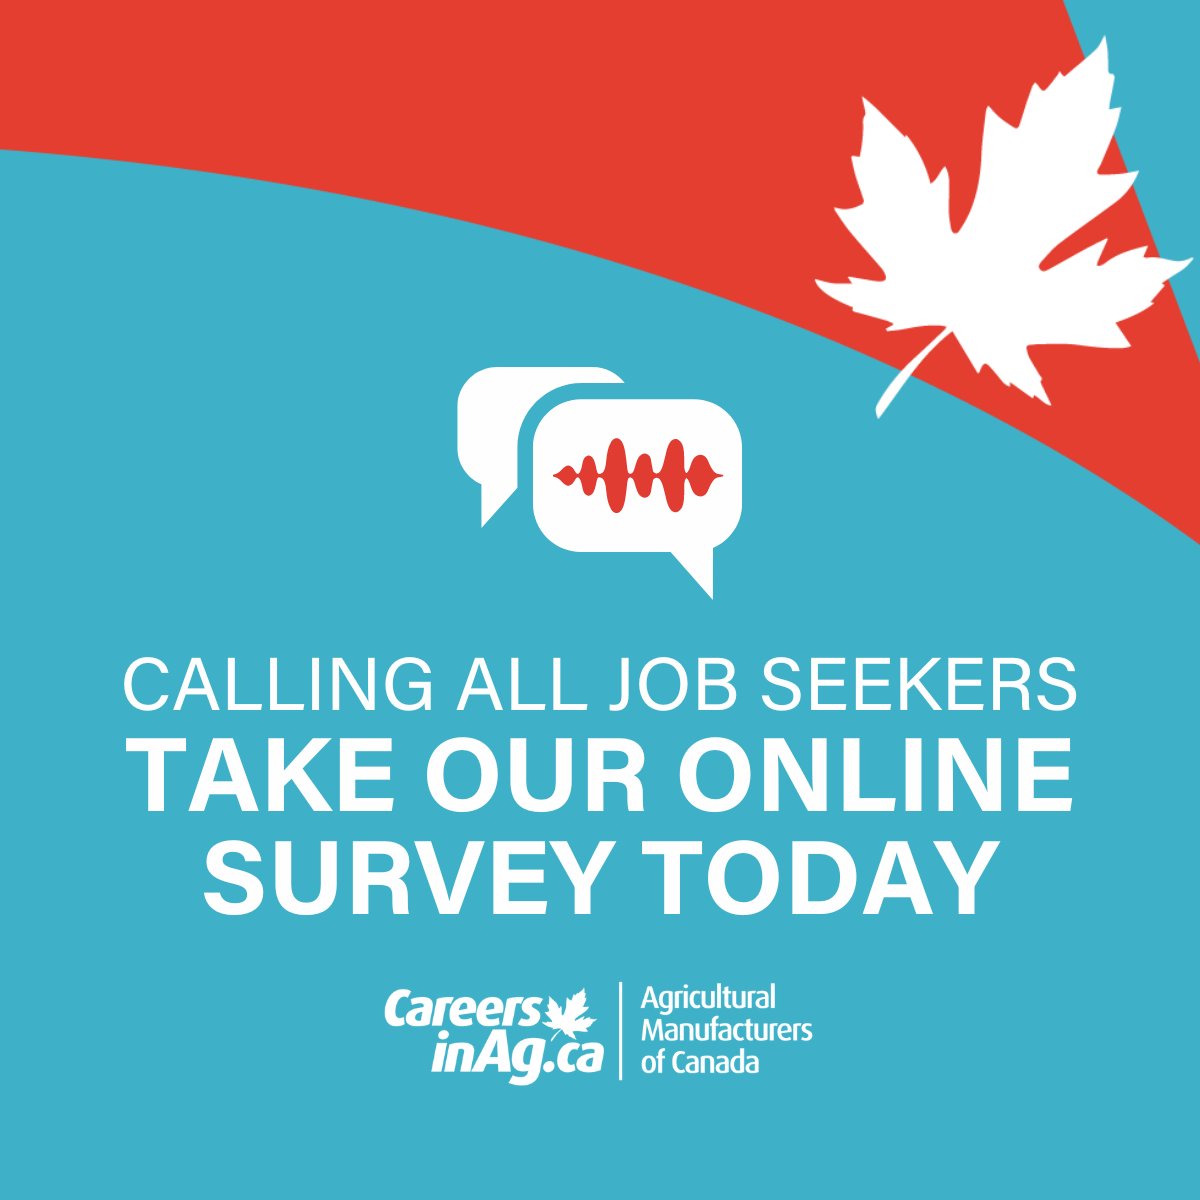 Attention Career Professionals! Share your opinions with employers from all across Canada. Please take a moment to fill out our Survey today: careersinag.ca/students-and-u… 

For Upskilling Professionals and Students of all ages.

 #CareersInAg #StudentSuccess #AgriJobs #WeBelieveInAg